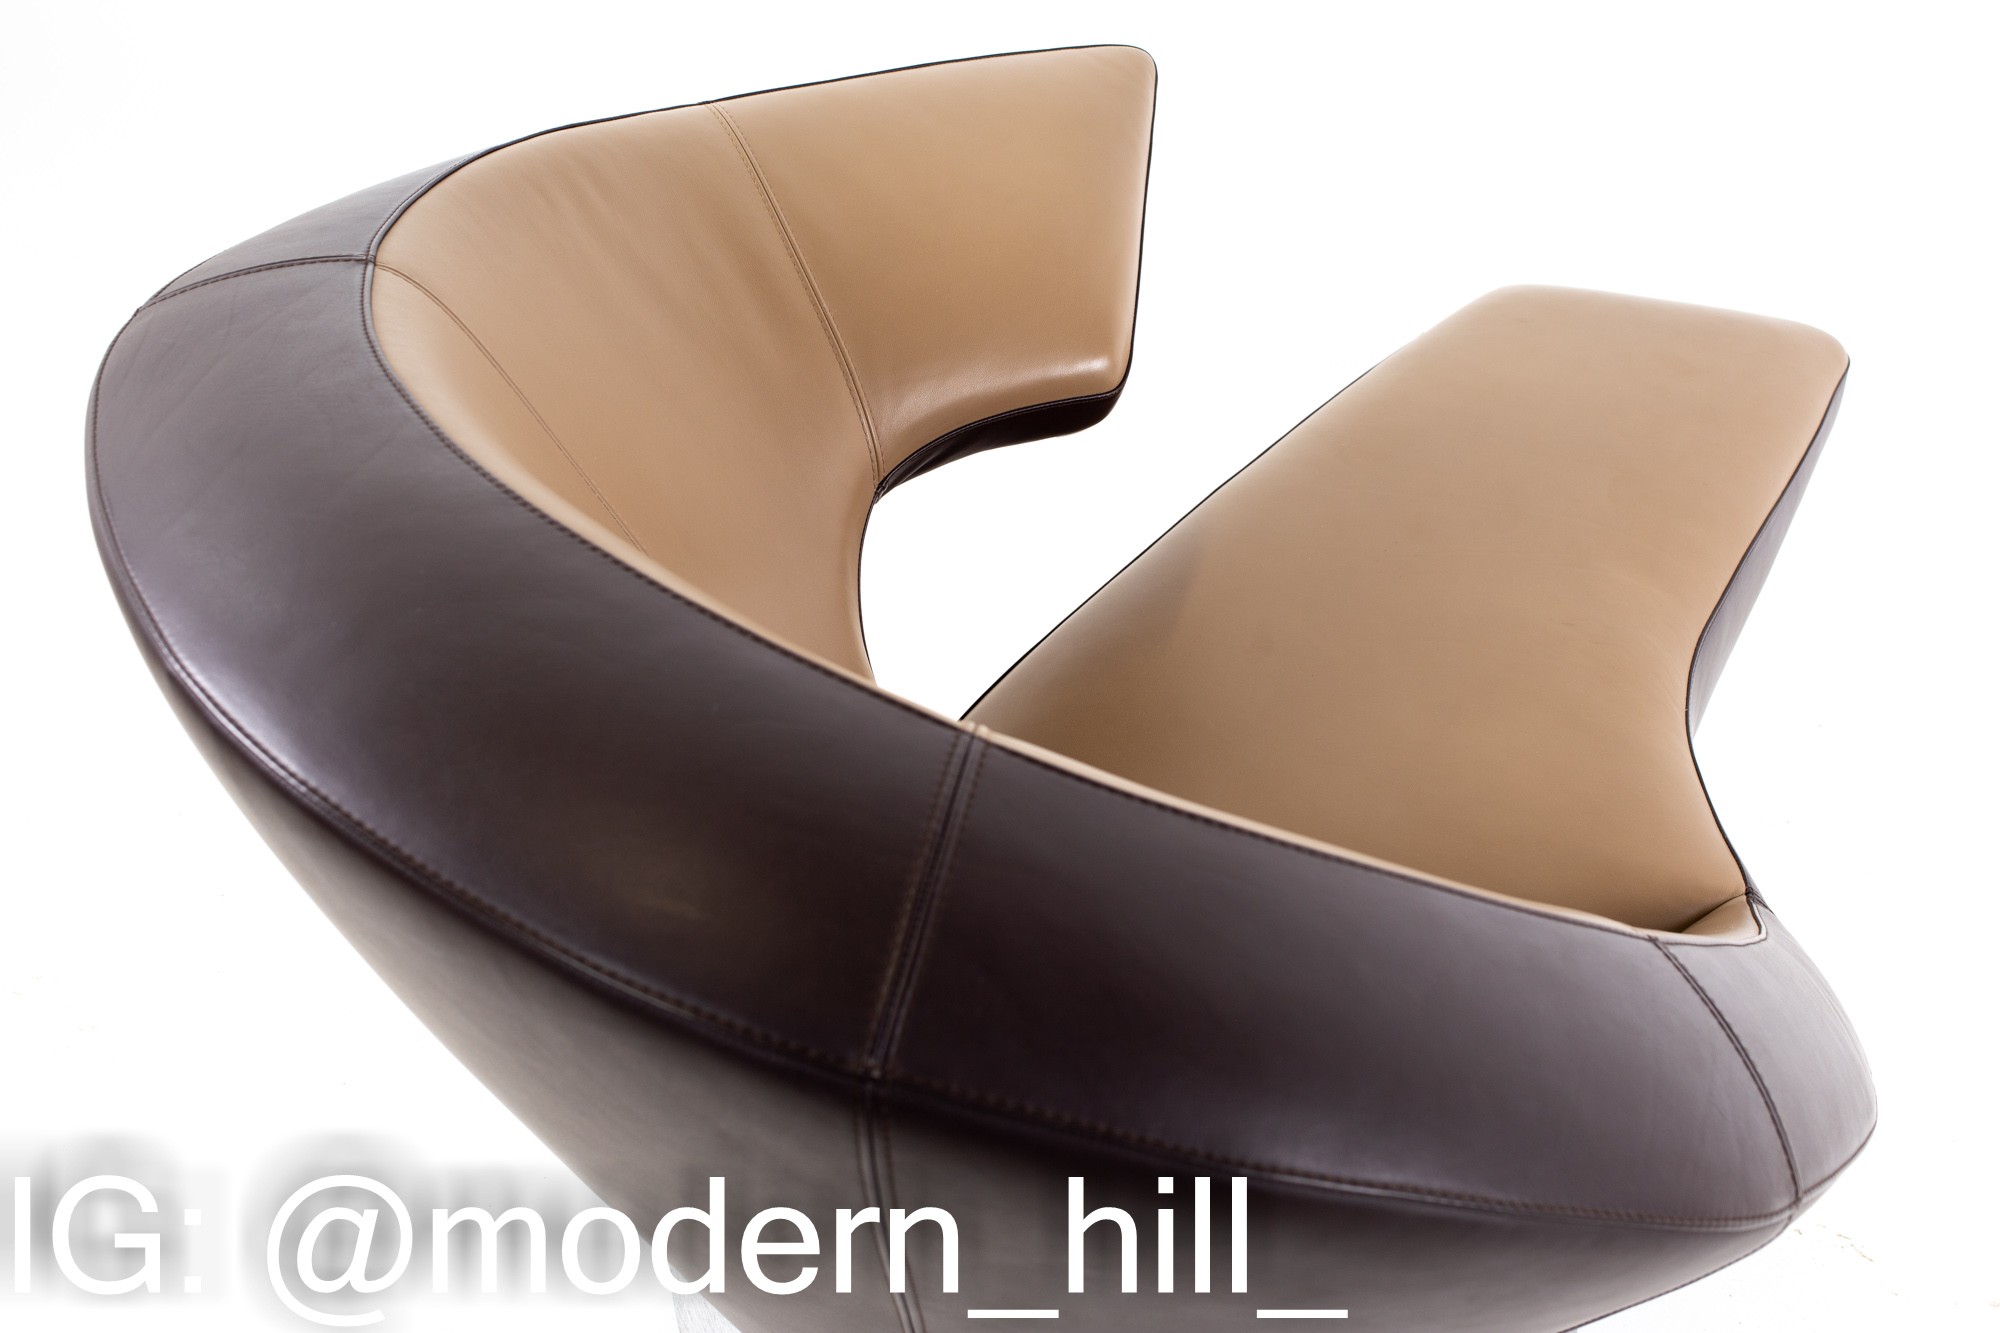 Leolux Leather Swivel Chaise Lounge Chairs - Pair